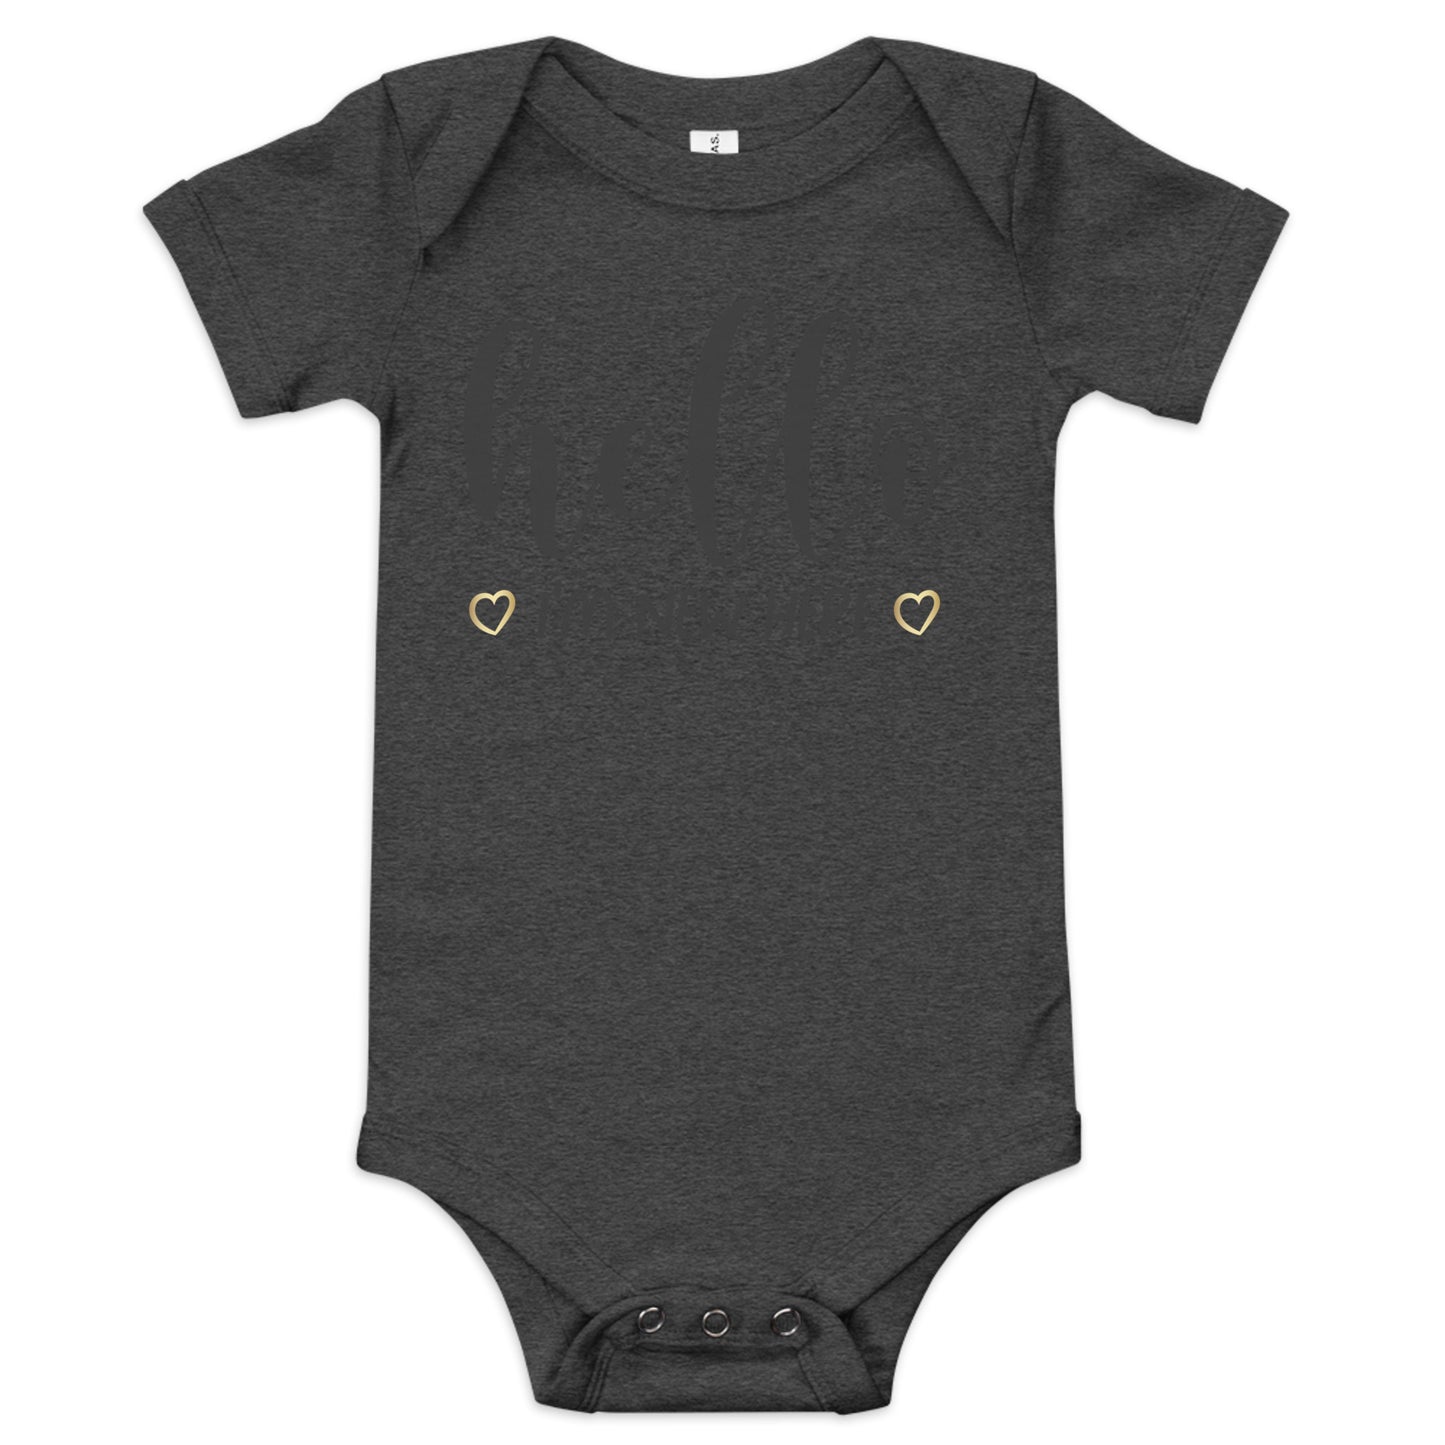 Baby short sleeve one piece - Hello I'm New Here